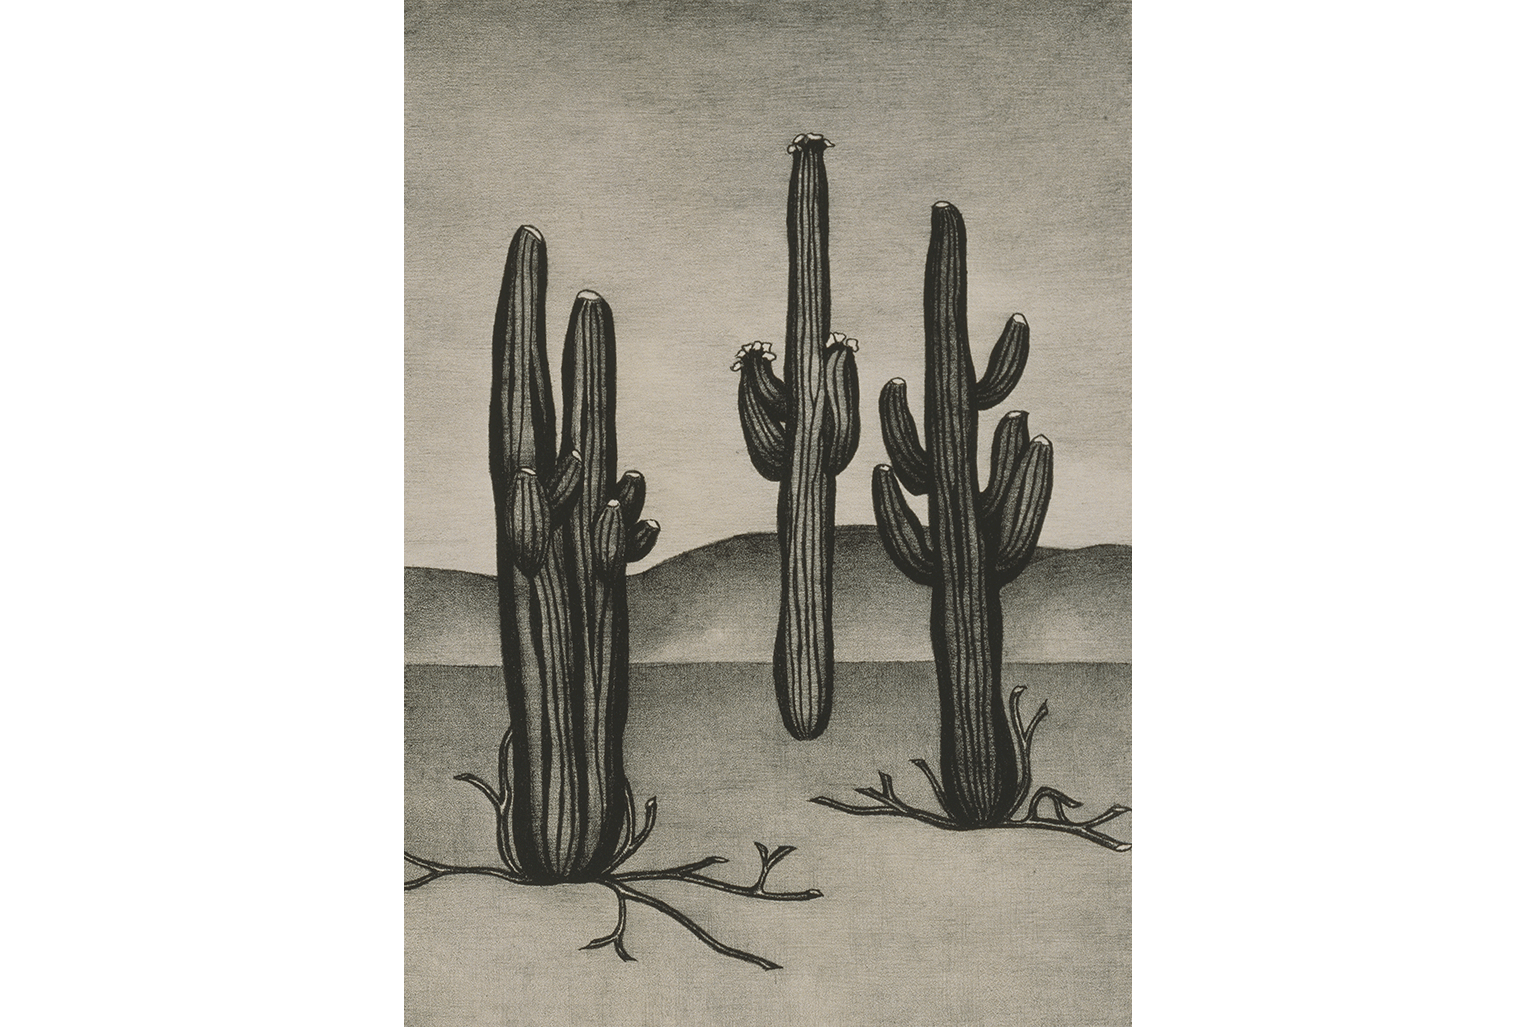 Henrietta Shore, Sentinels, 1927-1928, Lithograph, 13 x 10 in. The Buck Collection at UCI Jack and Shanaz Langson Institute and Museum of California Art.